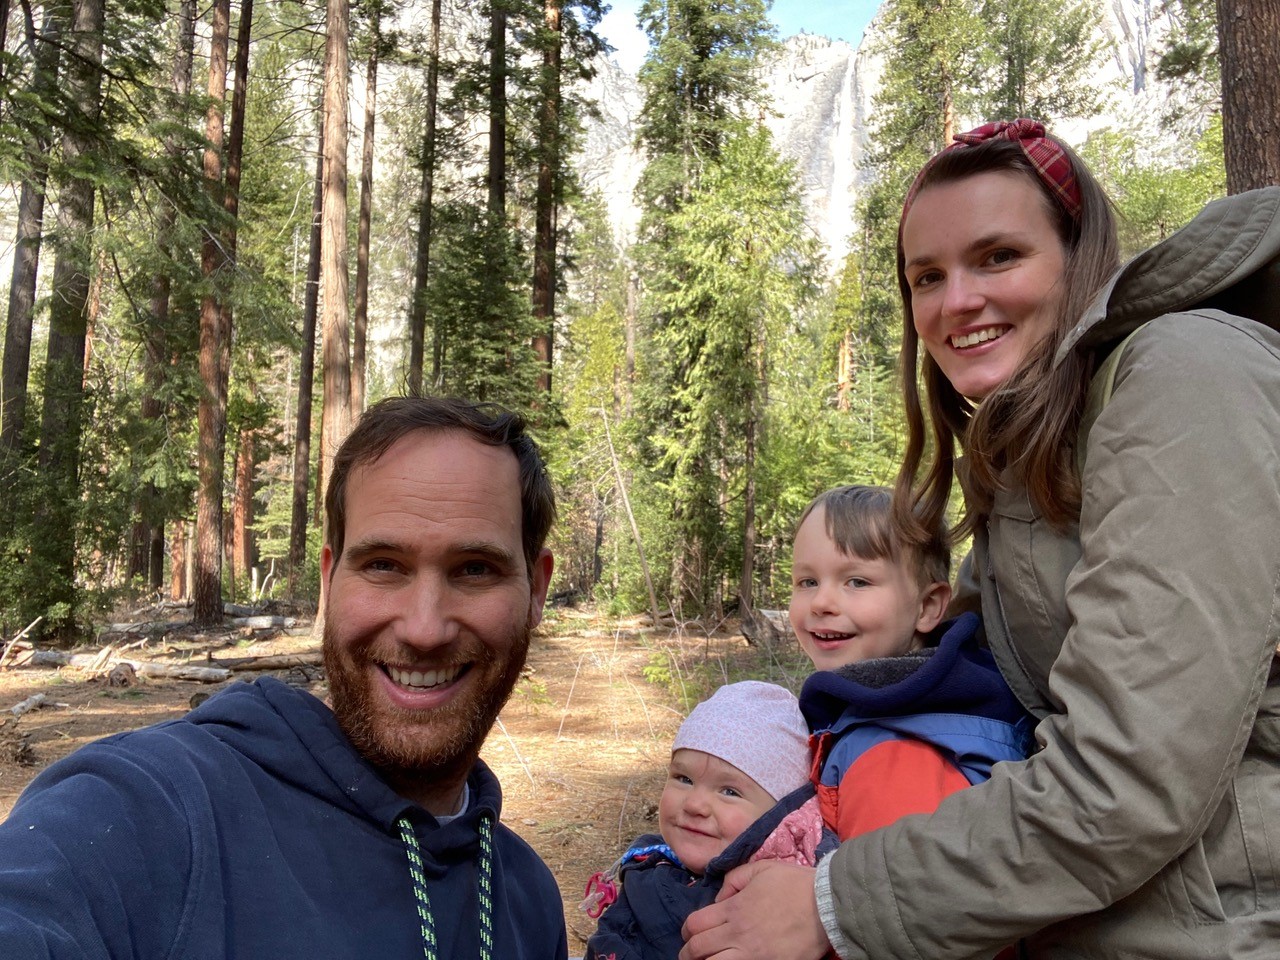 Family outing to Yosemite National Park